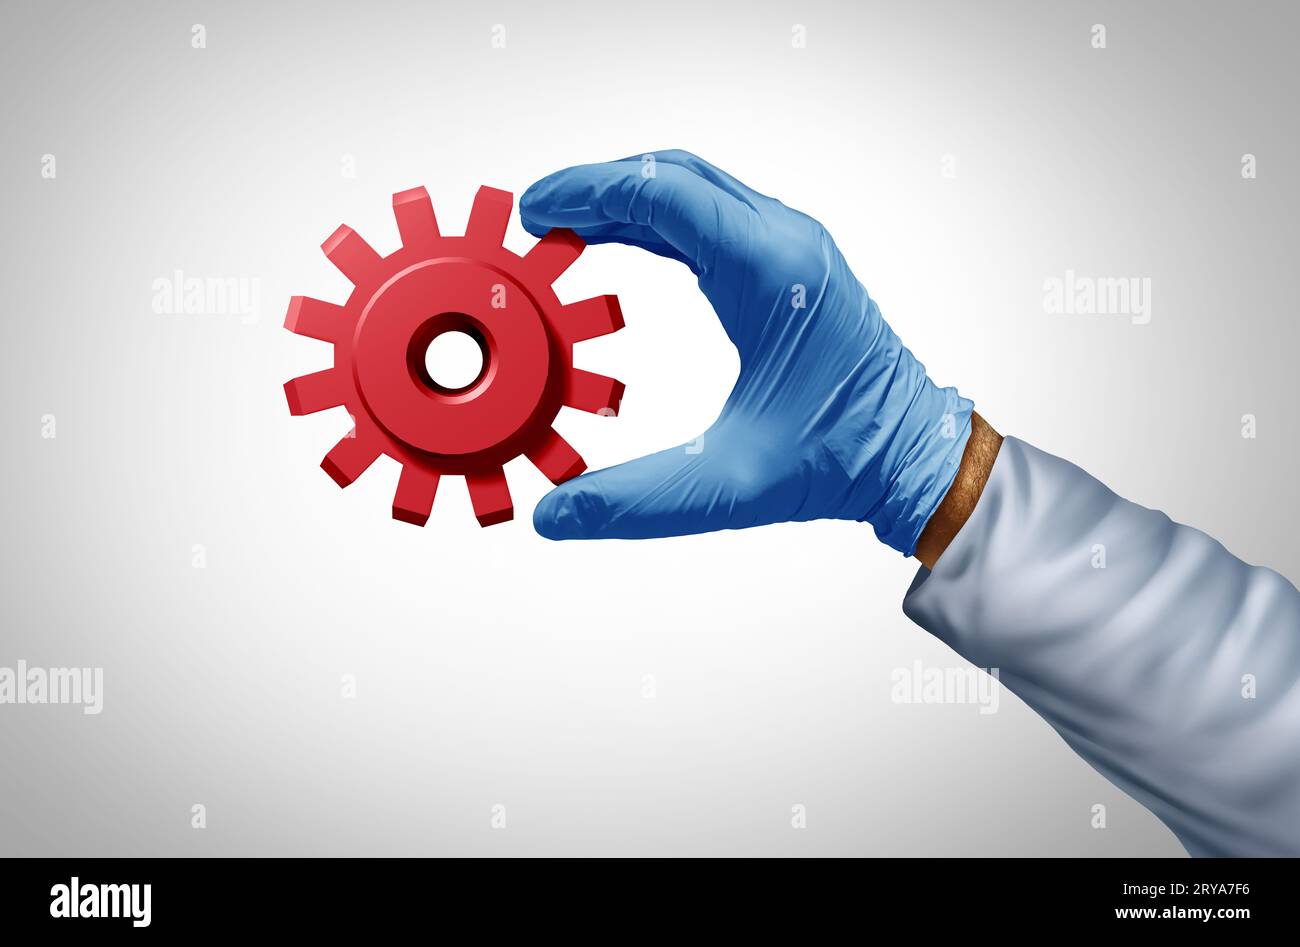 Medical Technology and Health care innovation as a doctor or nurse and researcher with a gear or cog as a medicine tech symbol for telemedicine. Stock Photo